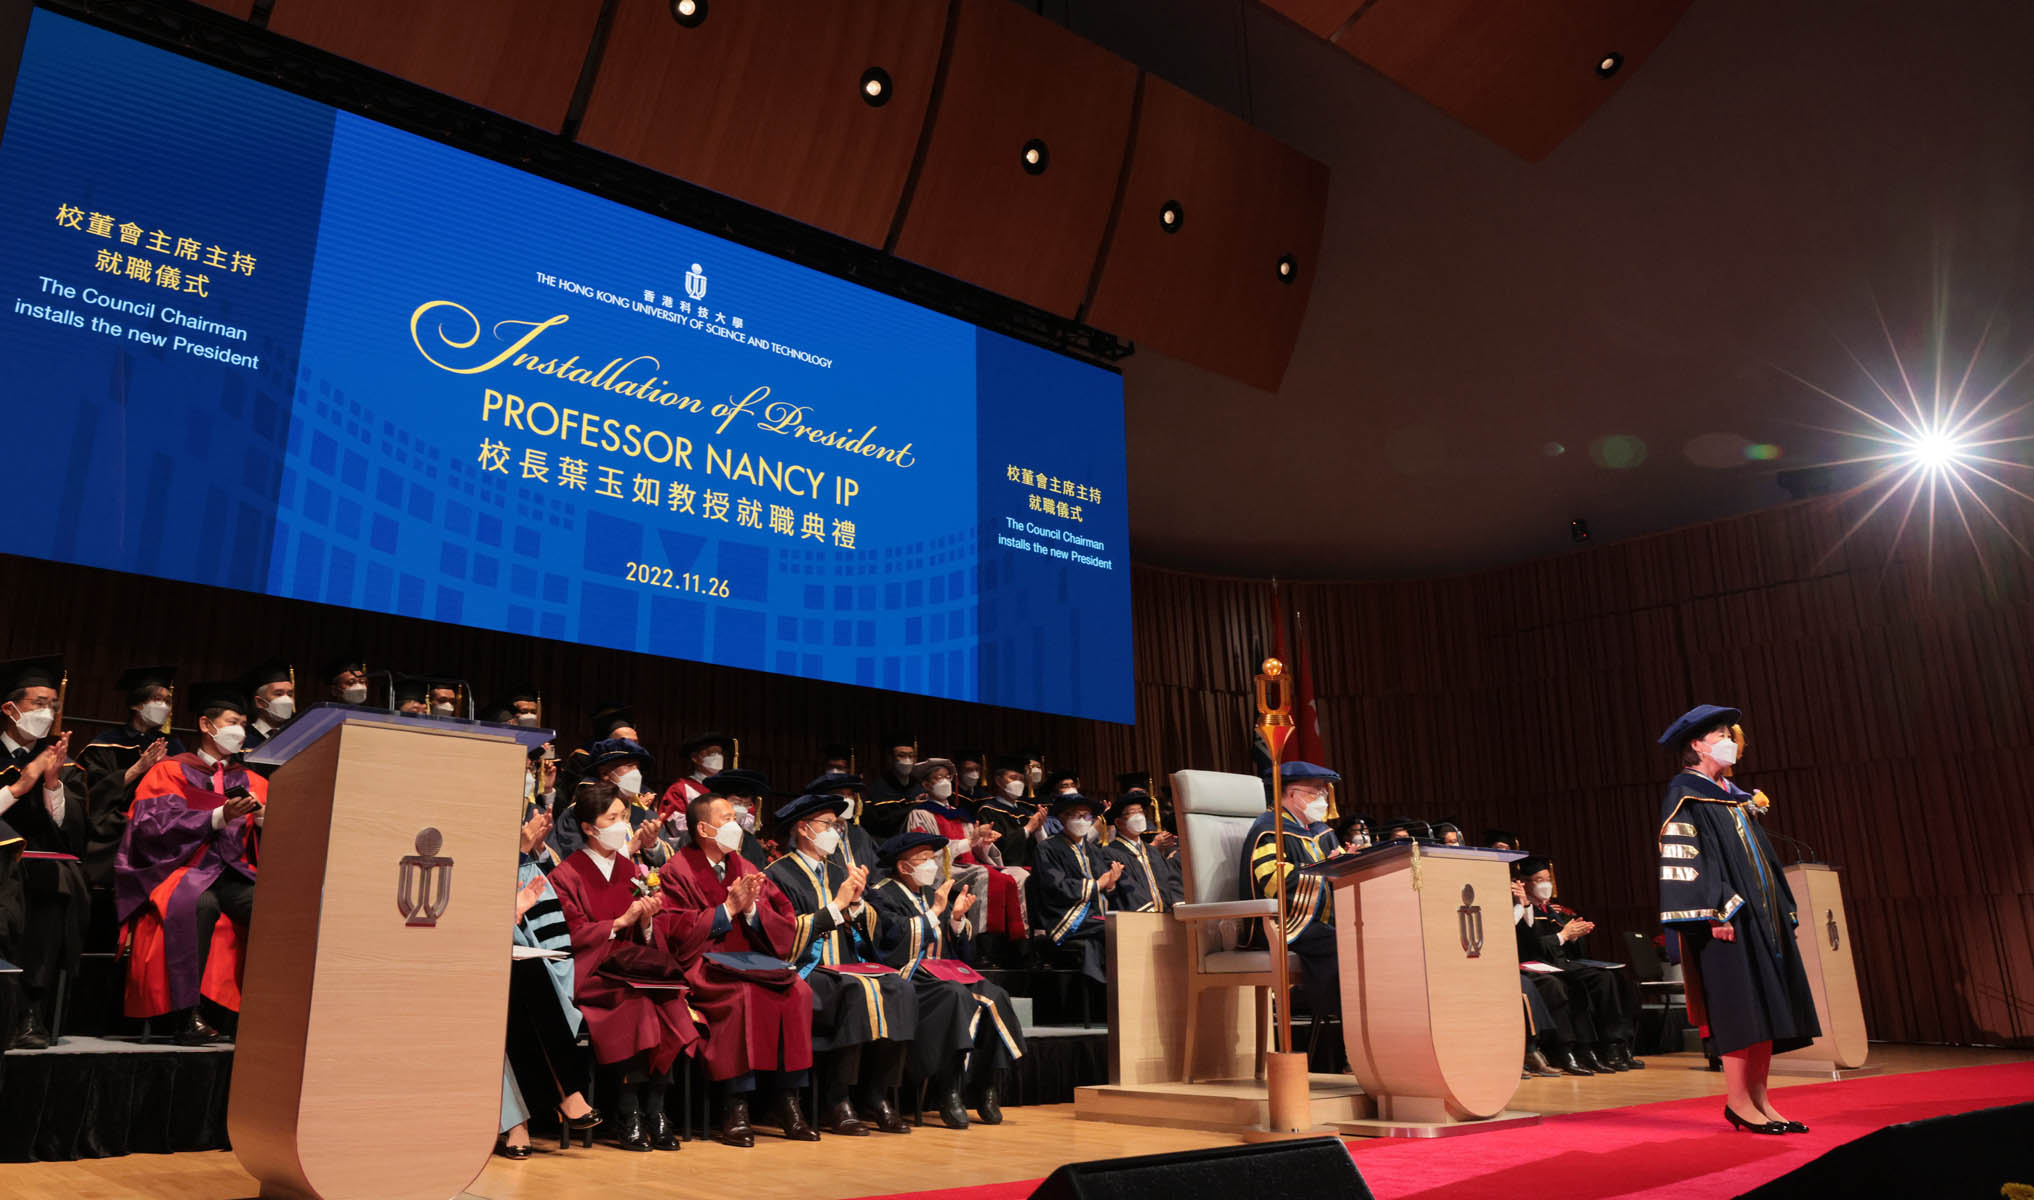 HKUST holds the installation of its fifth President Prof. Nancy IP cum 30th Congregation today